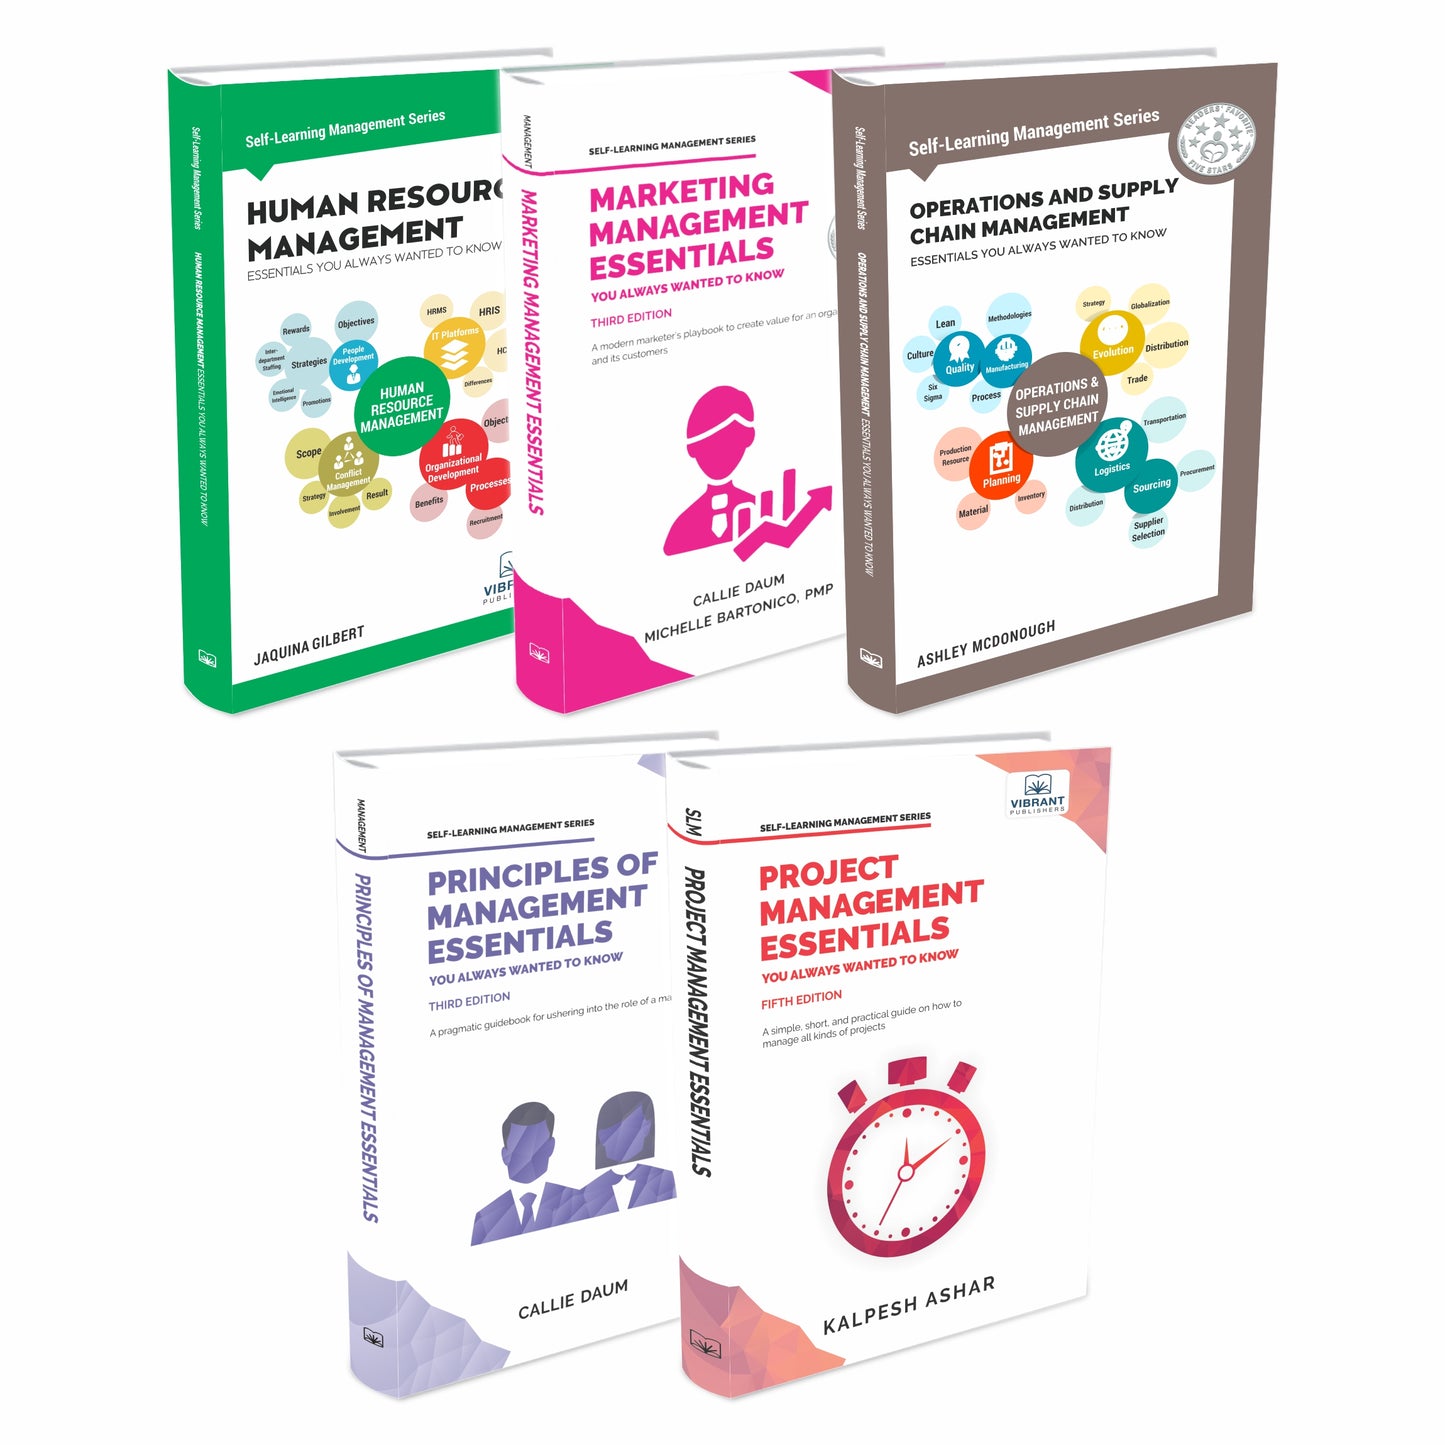 Self-Learning Management Essentials for Entrepreneurs and Professionals – Ideal for Business Startups, Consultants, Entry to Mid-Level Managers (Concise & Easy to Understand Guides with Case Studies)